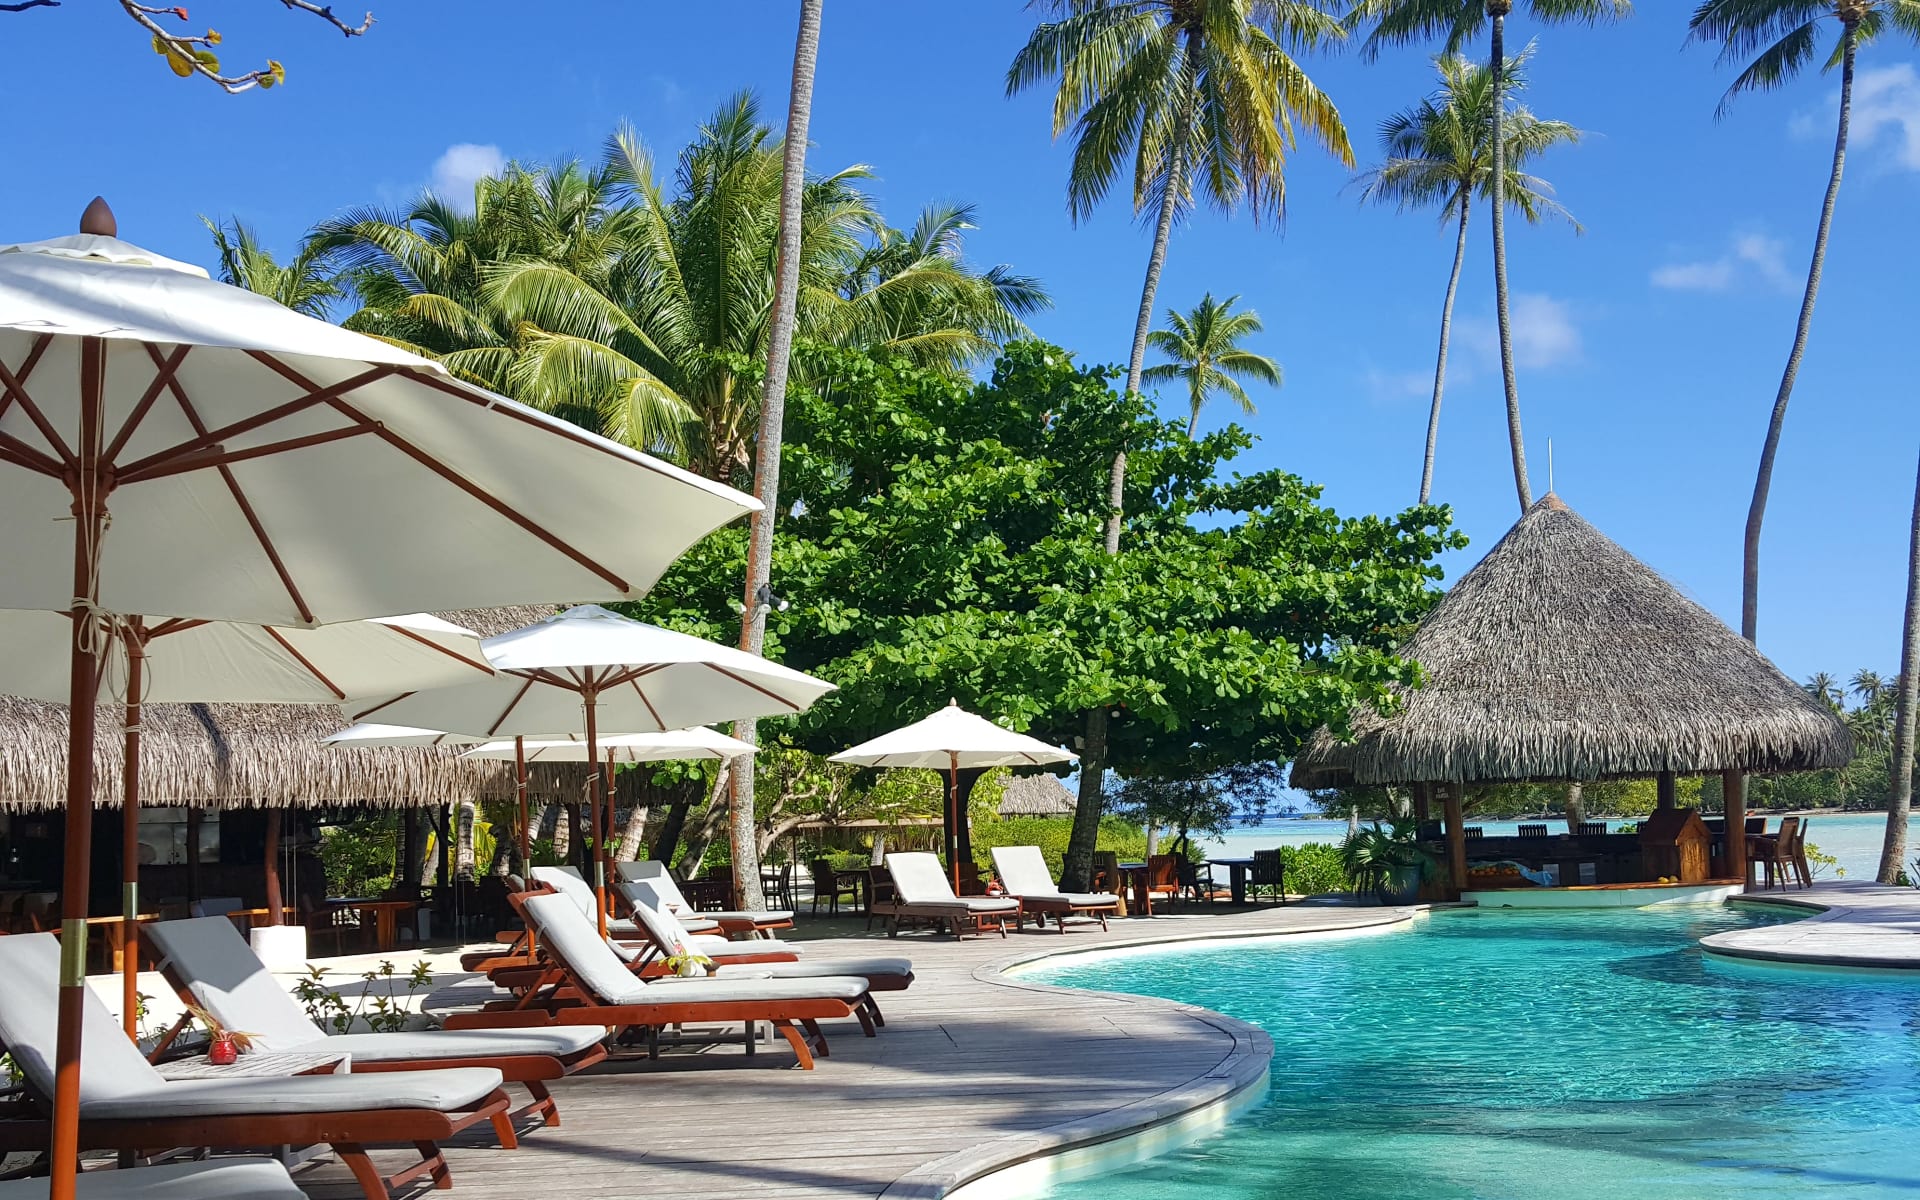 Sunloungers and white umbrellas overlook a blue pool and a thatched-roof pool bar.  